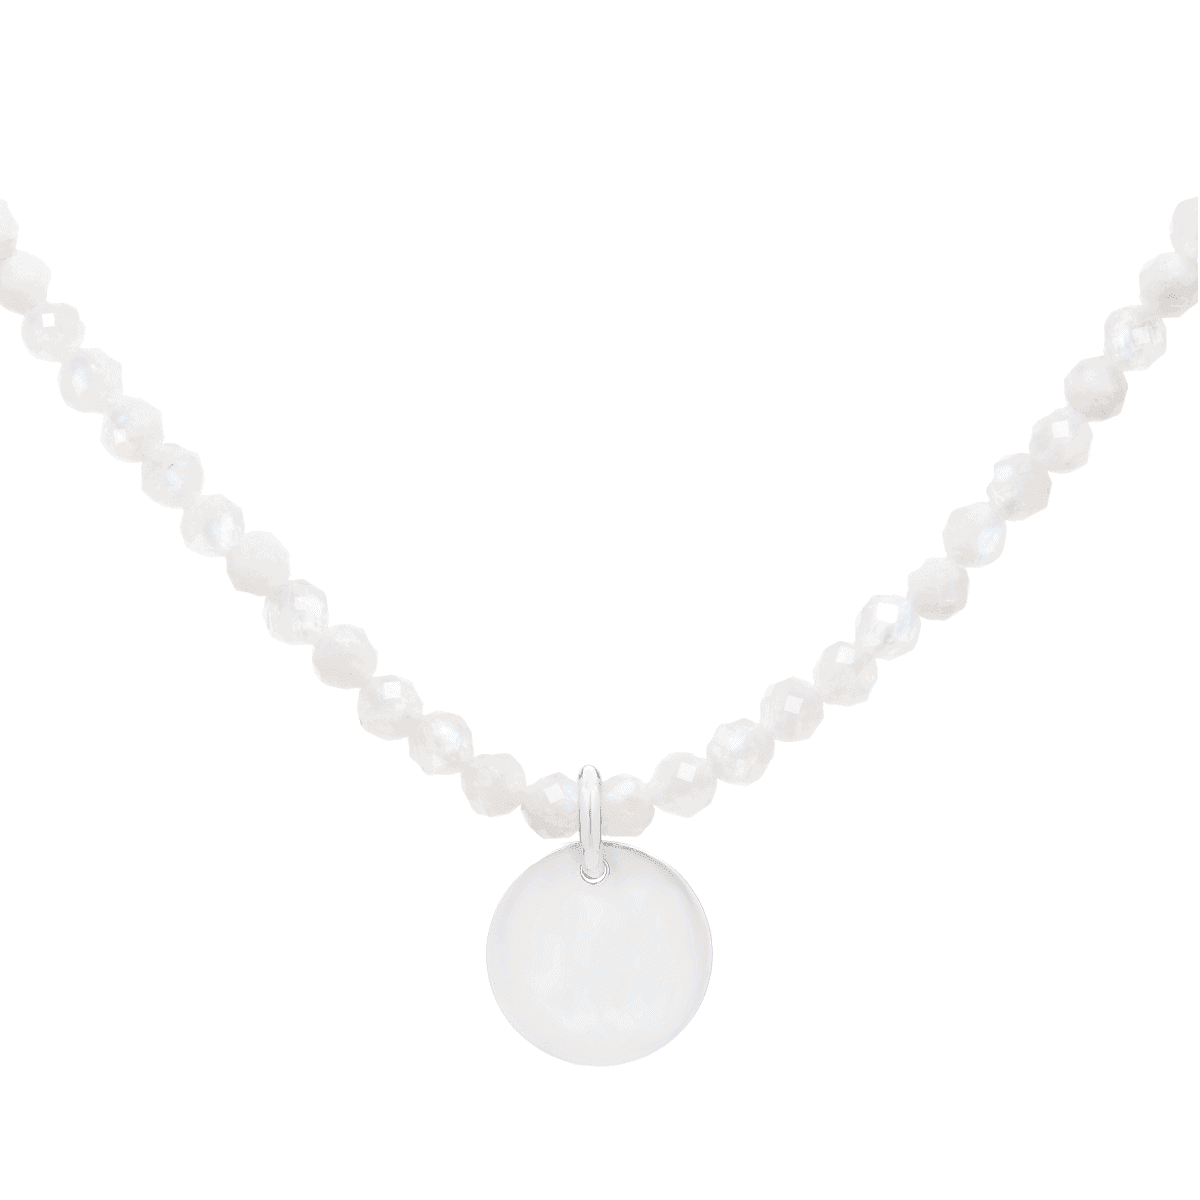 Moonstone necklace with personalized pendant